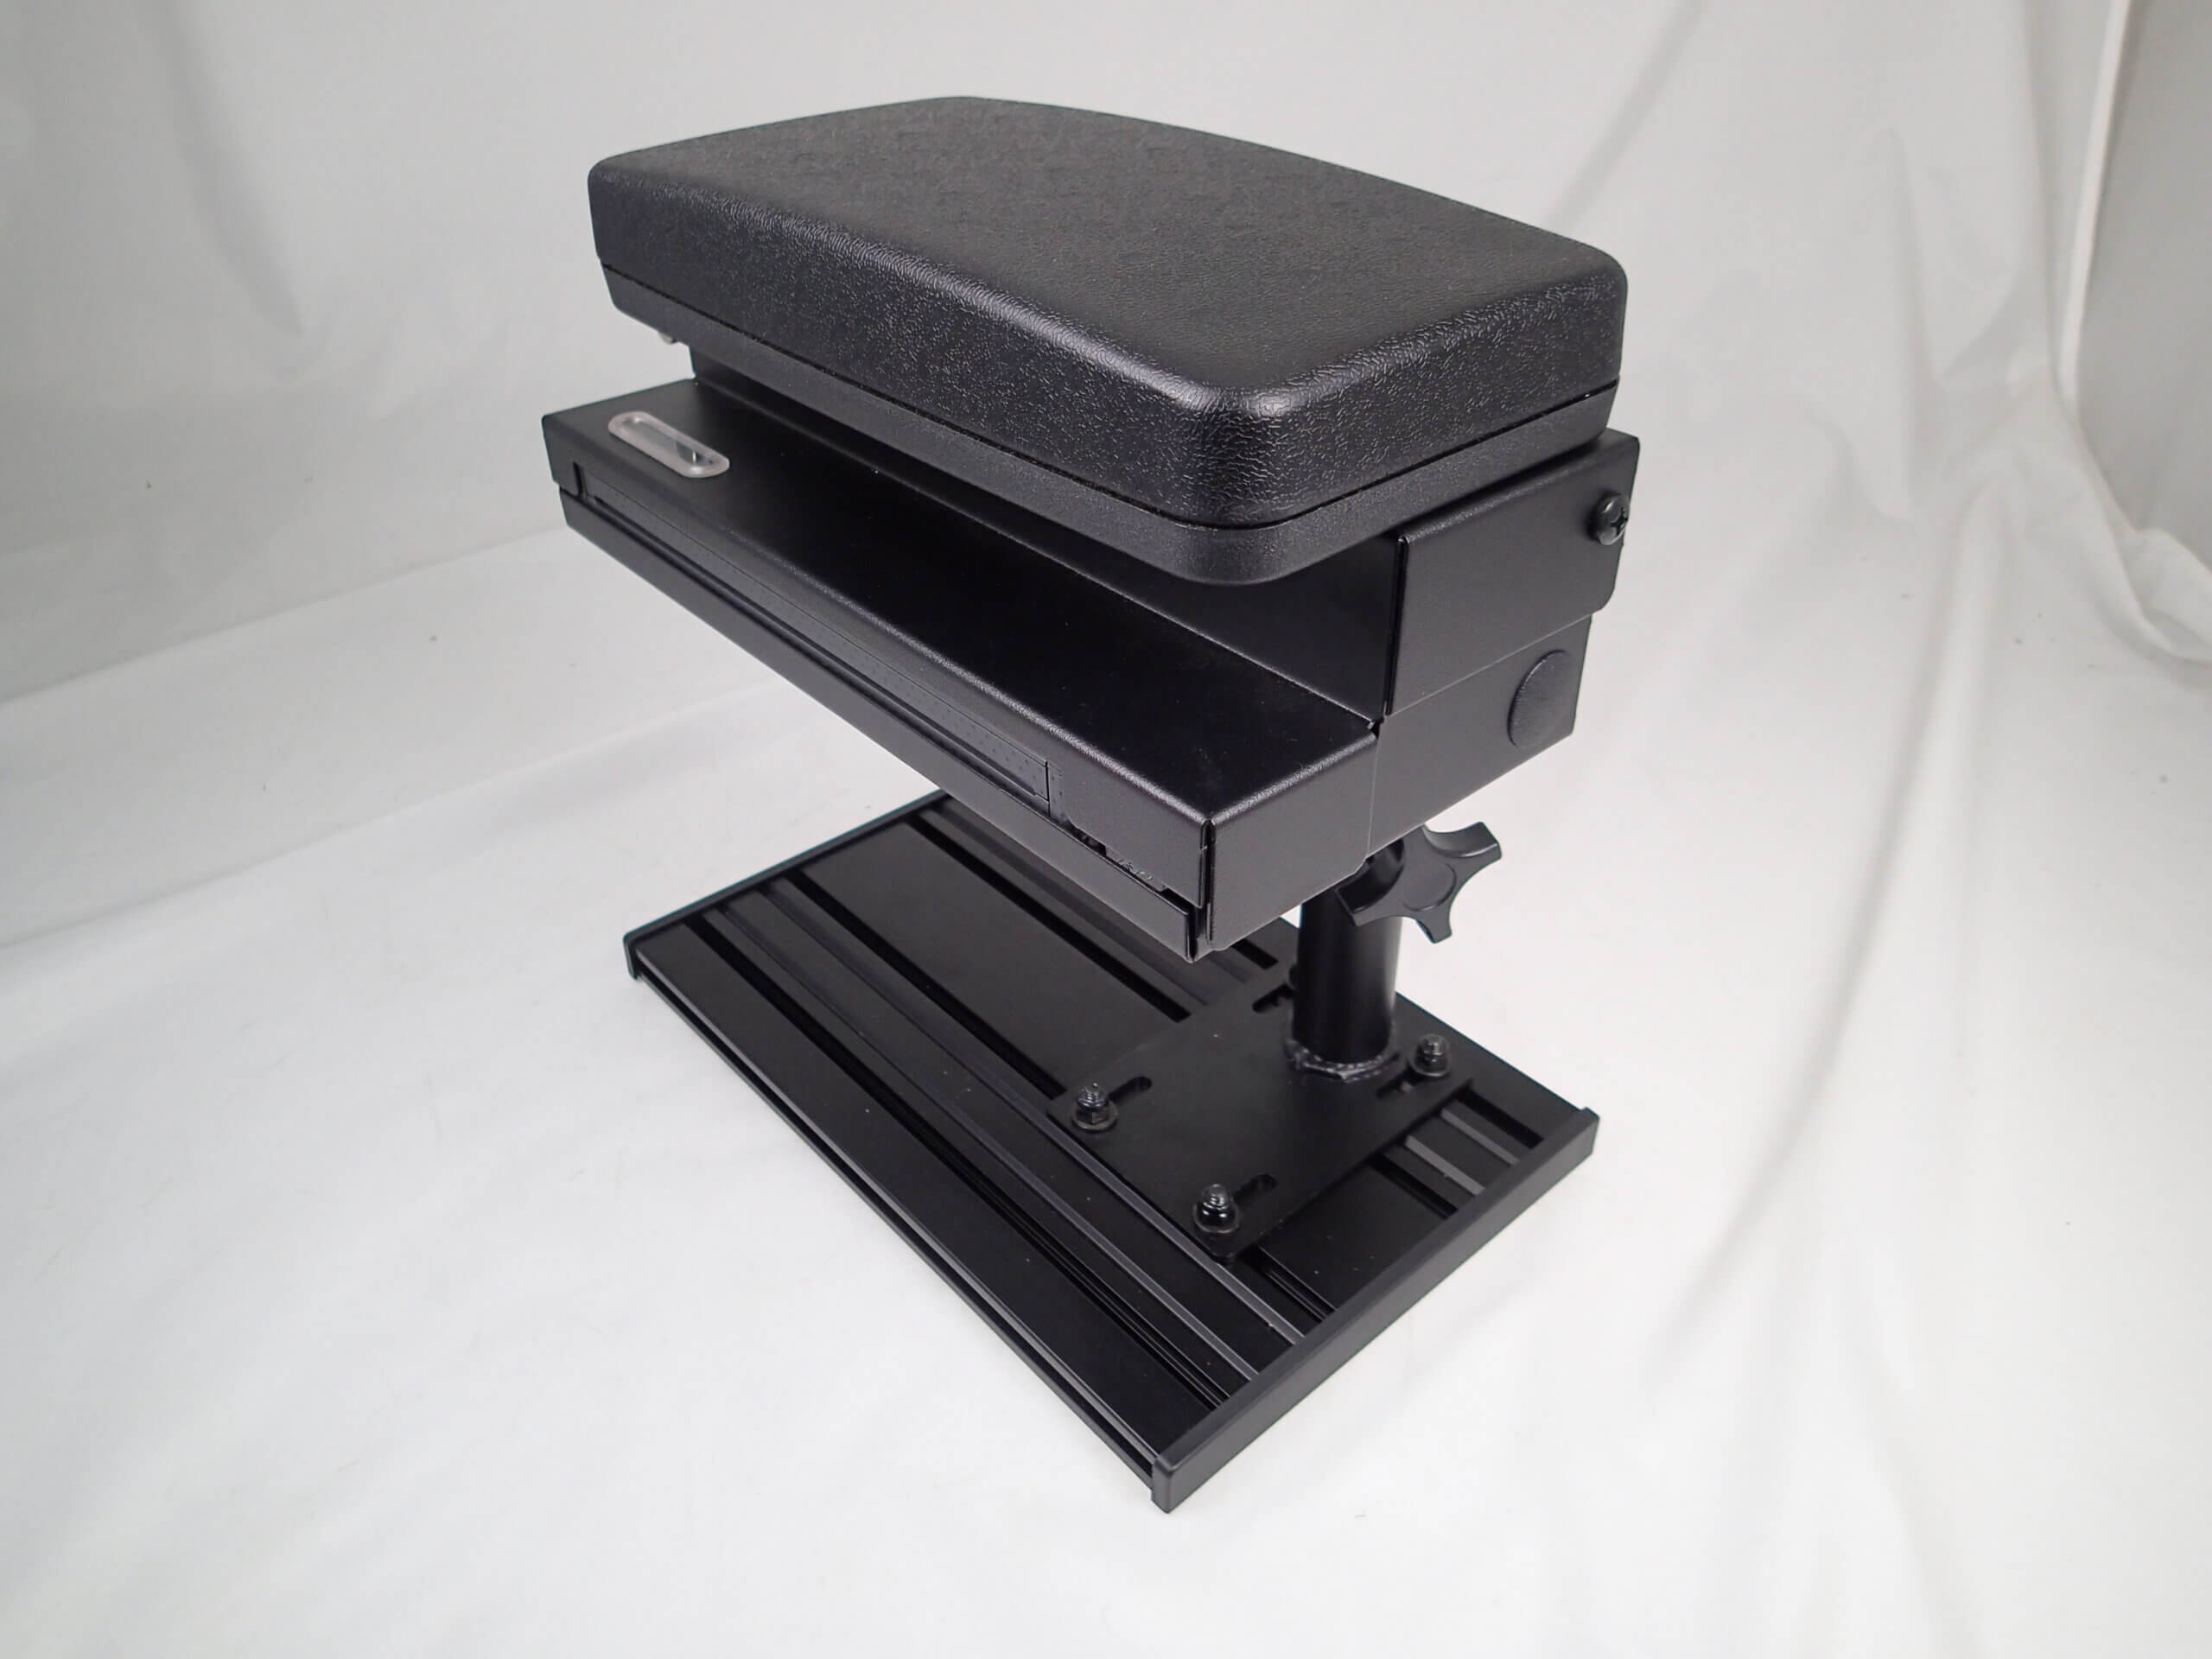 DISCONTINUED – Brother PocketJet Roll-Feed Printer Mount and Arm Rest: Pedestal